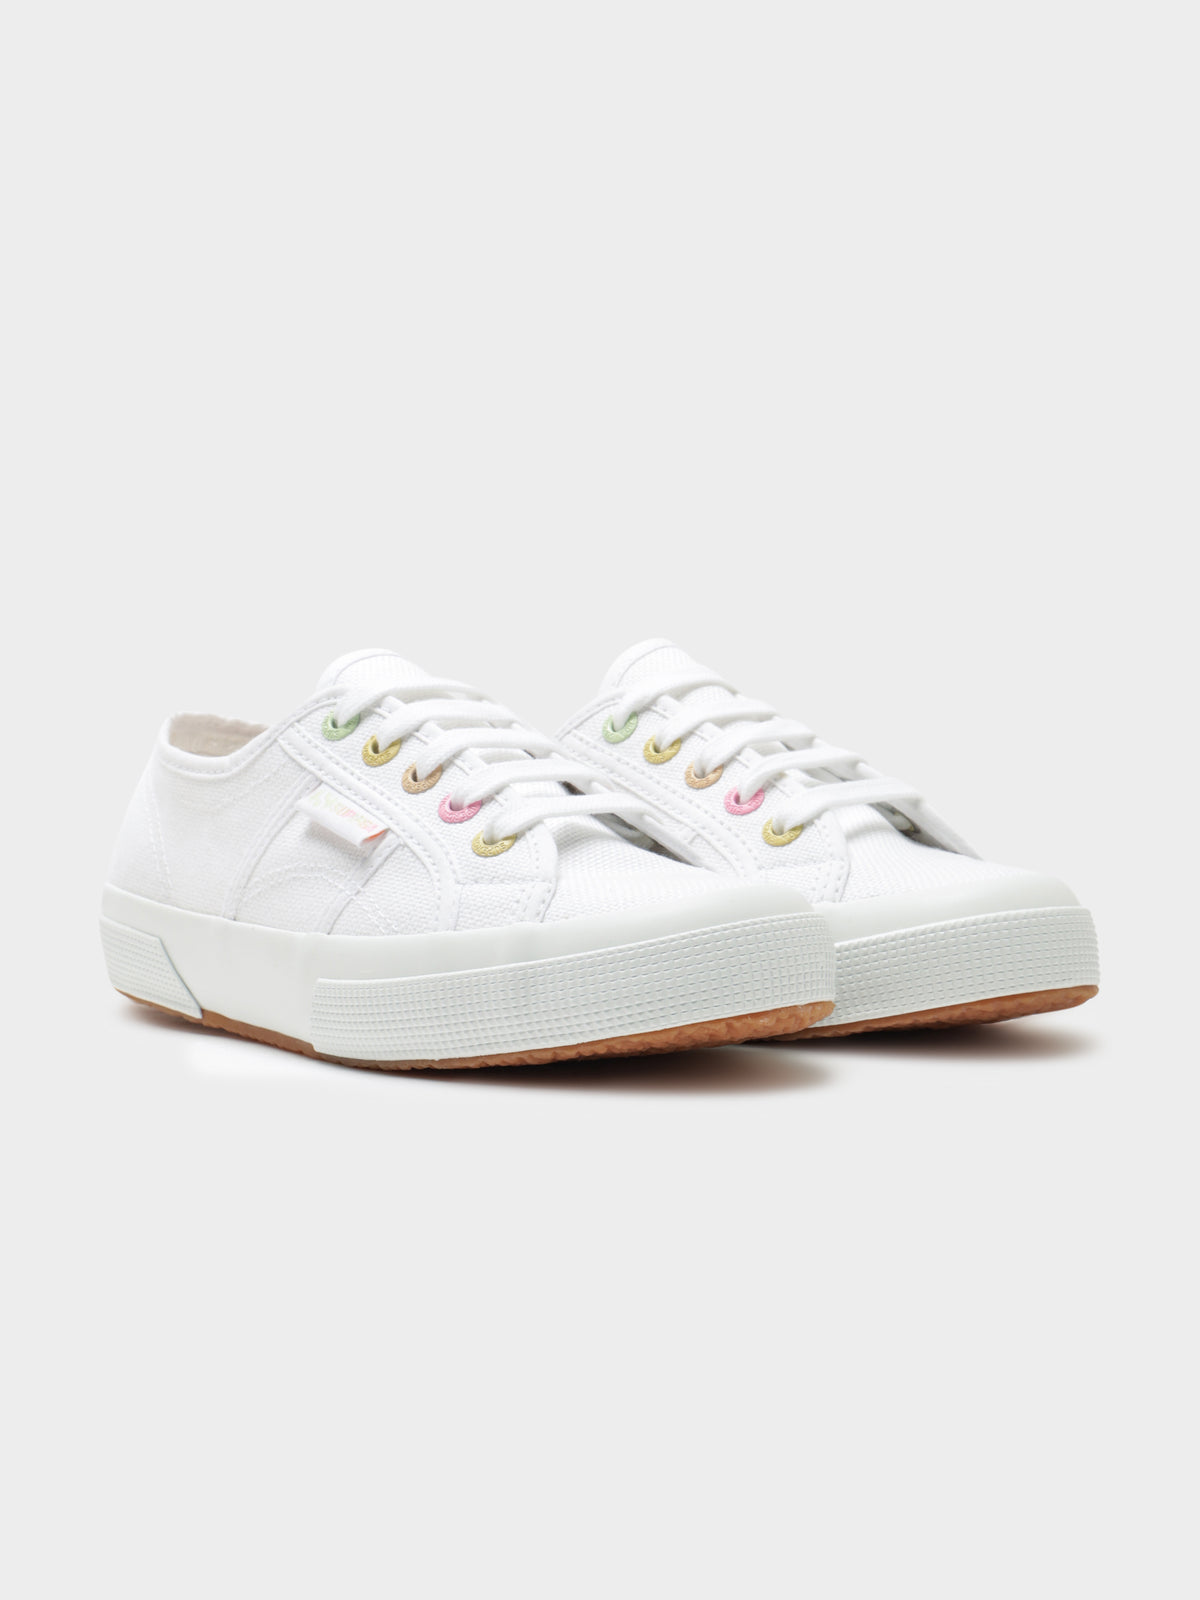 Womens 2750 Rainbow Details Sneaker in Candy Multicolour